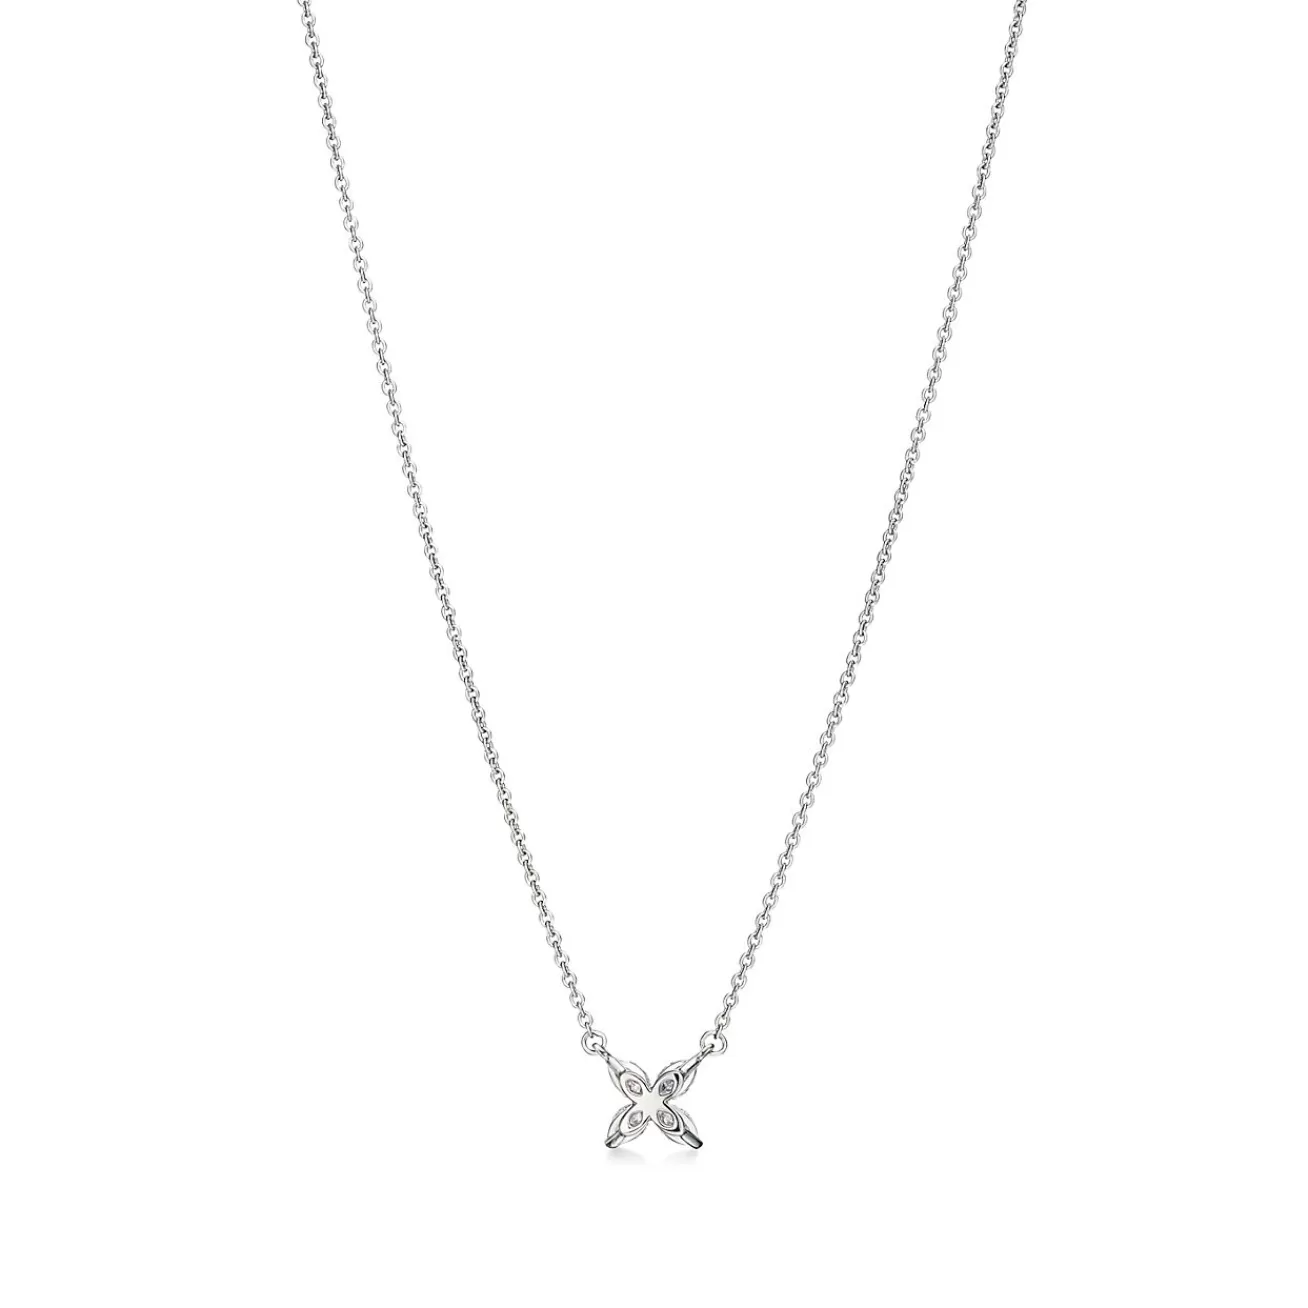 Tiffany & Co. Tiffany Victoria® pendant in platinum with diamonds, small. | ^ Necklaces & Pendants | Gifts for Her